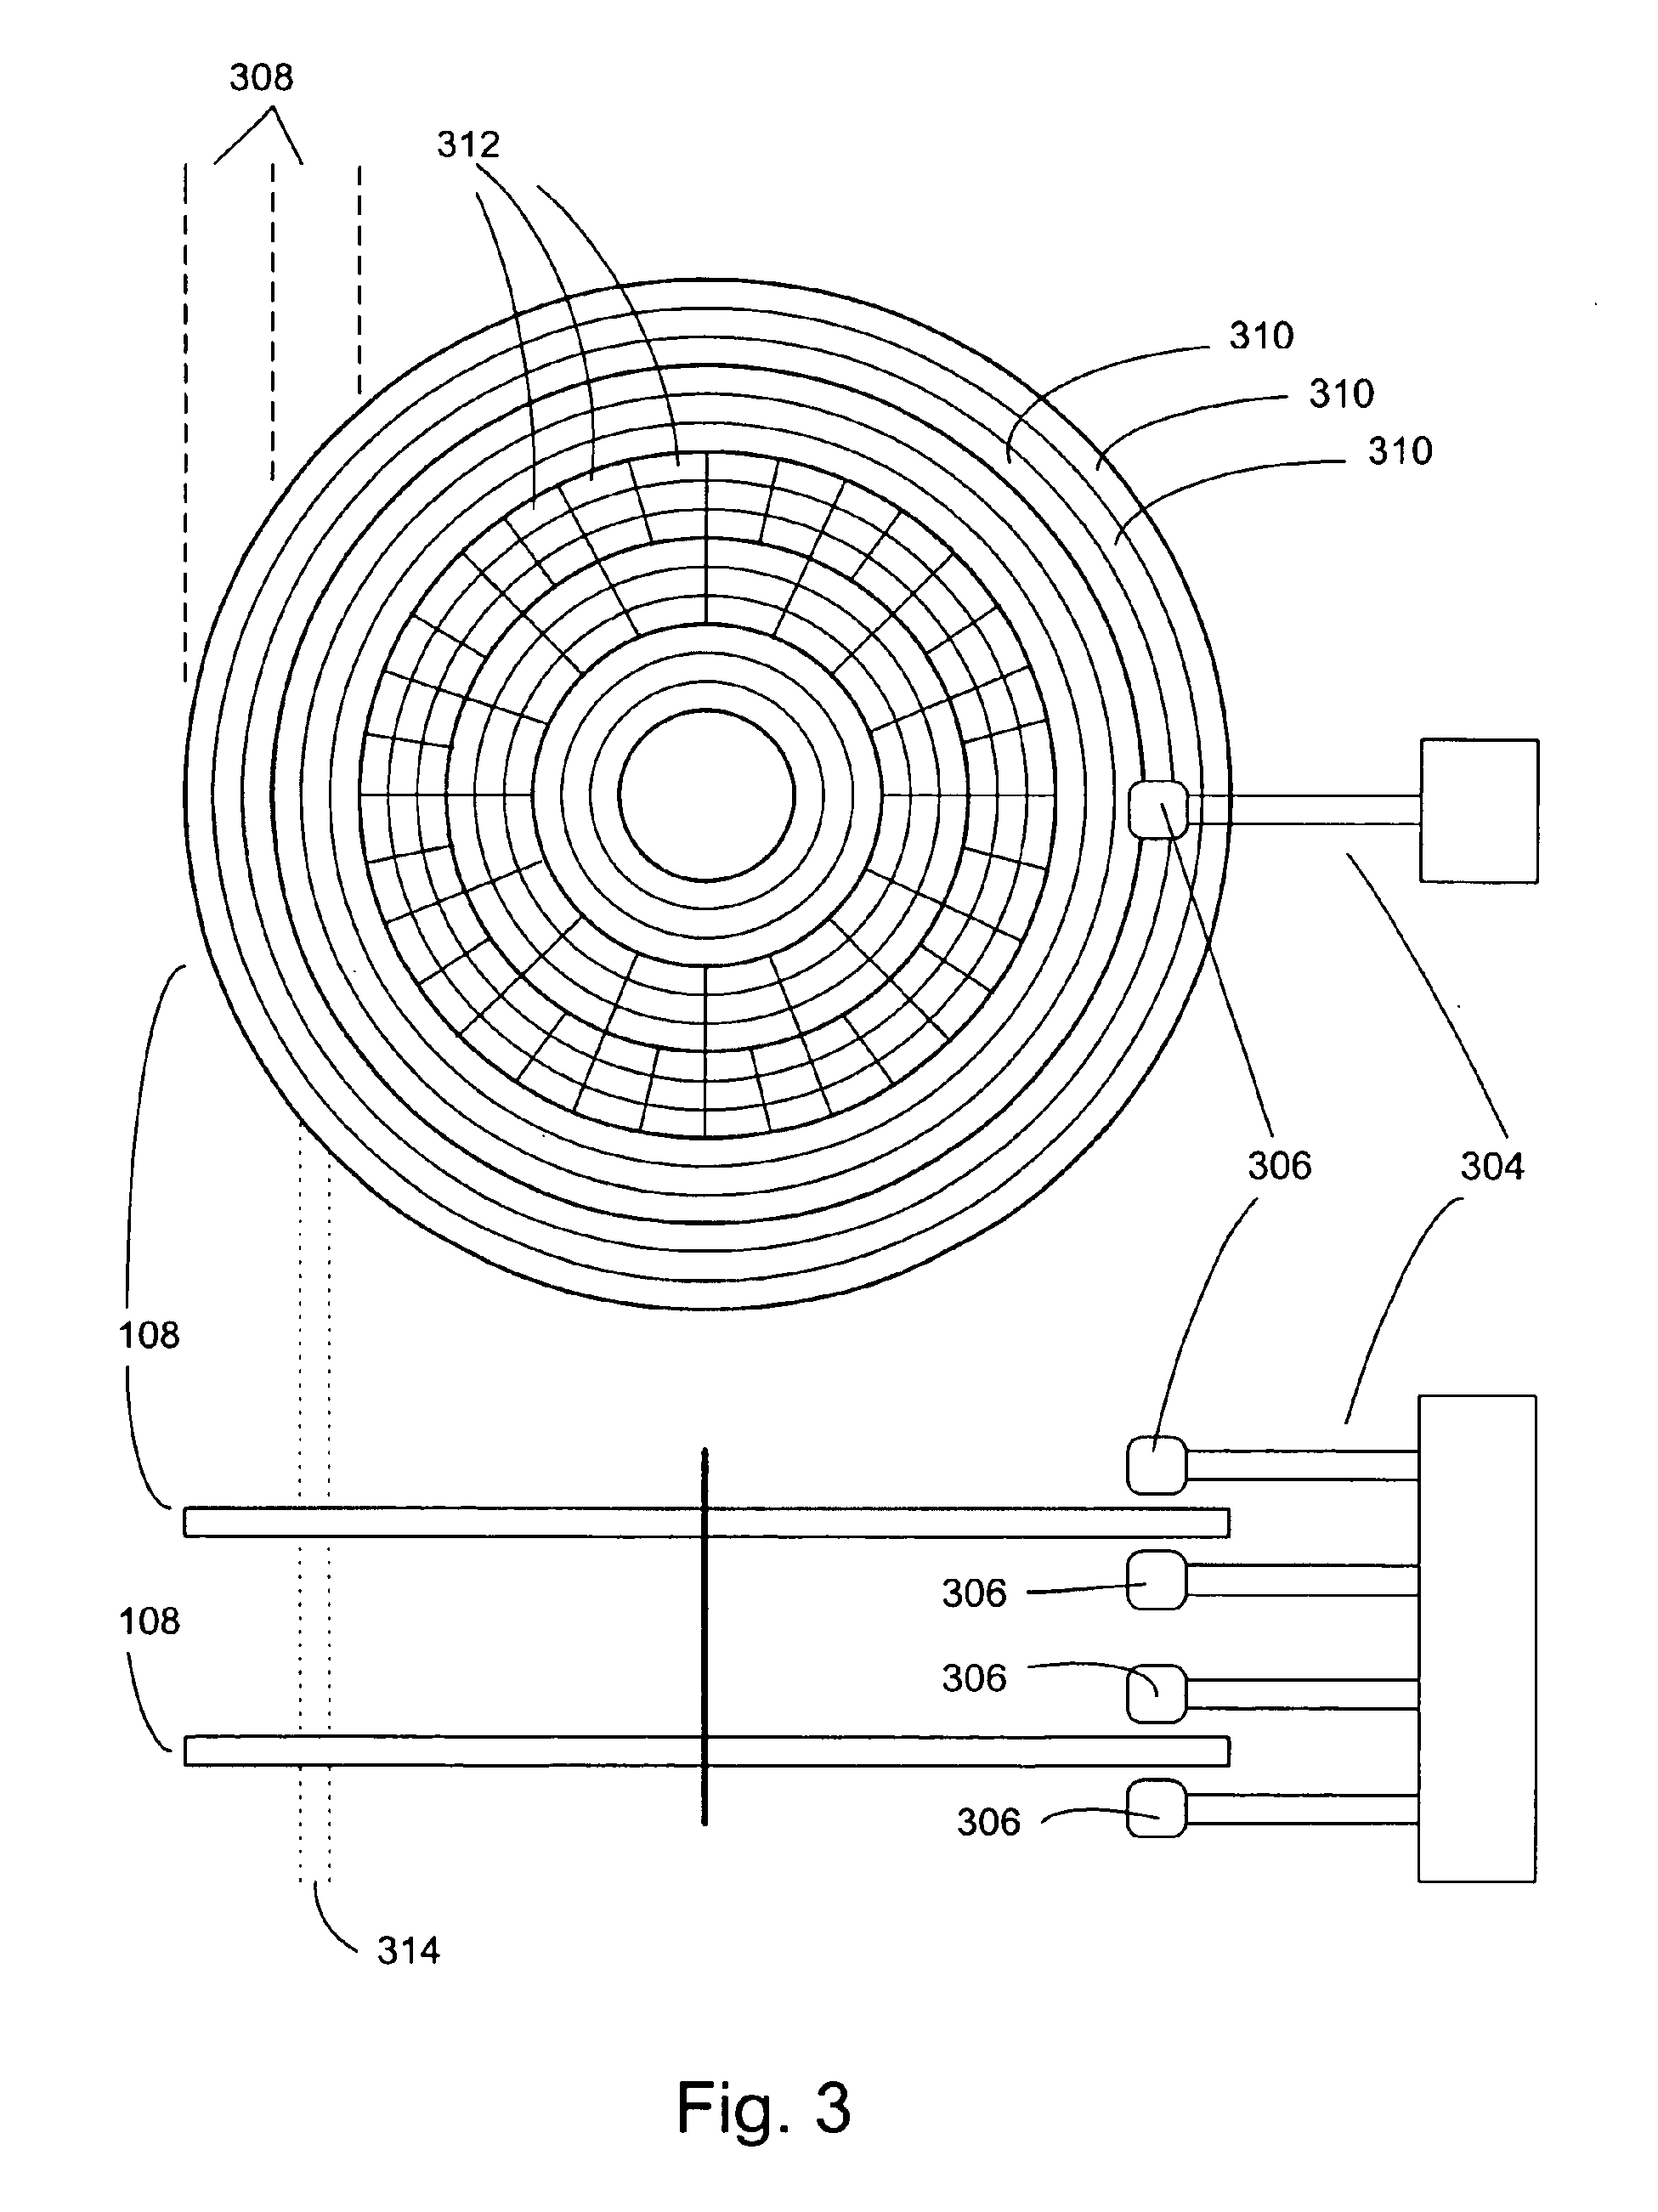 Full volume slip defect management in a disc drive